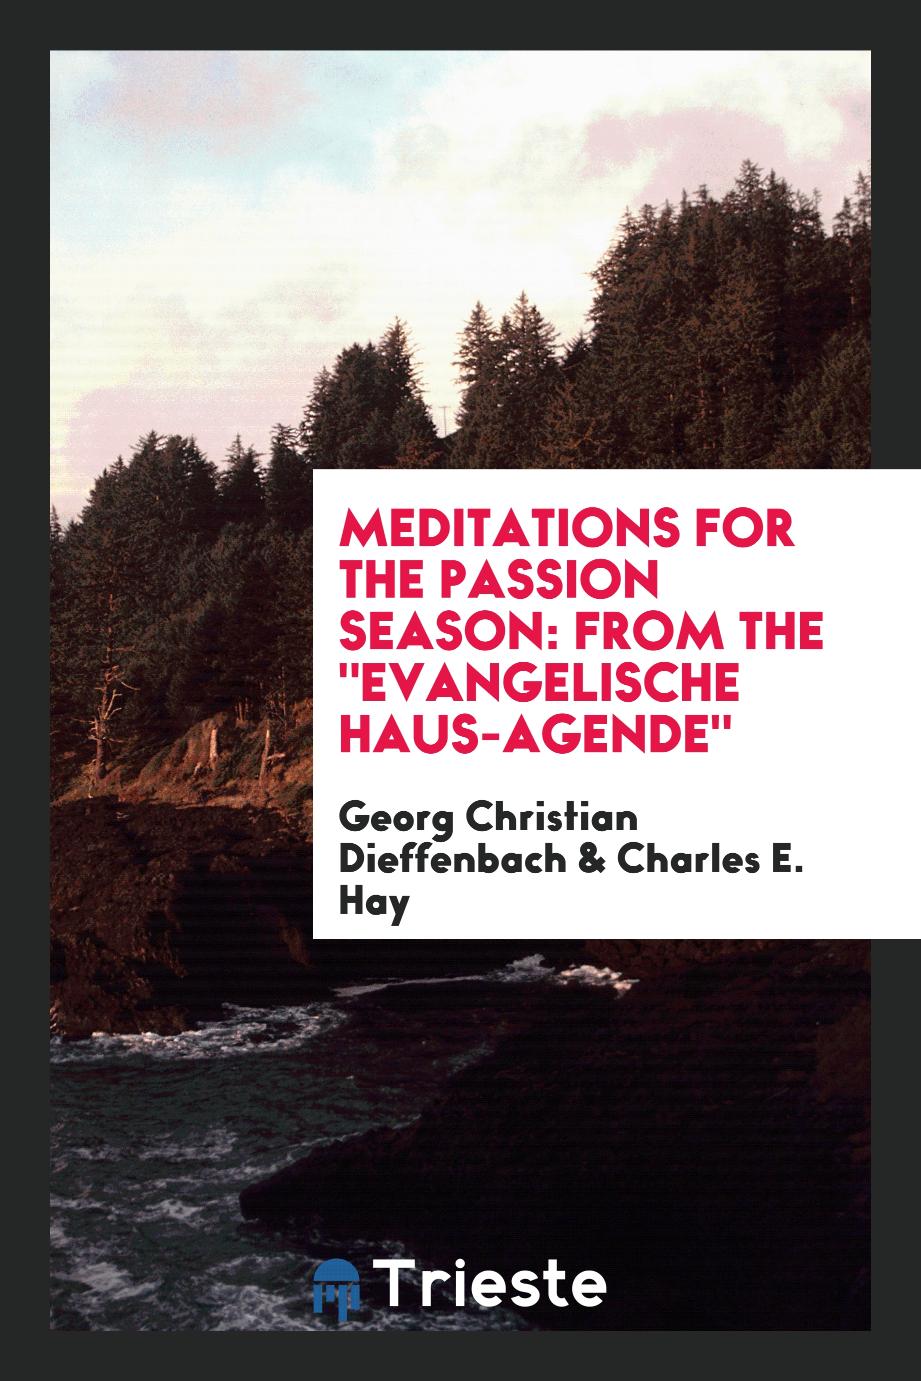 Meditations for the Passion Season: From The "Evangelische Haus-Agende"